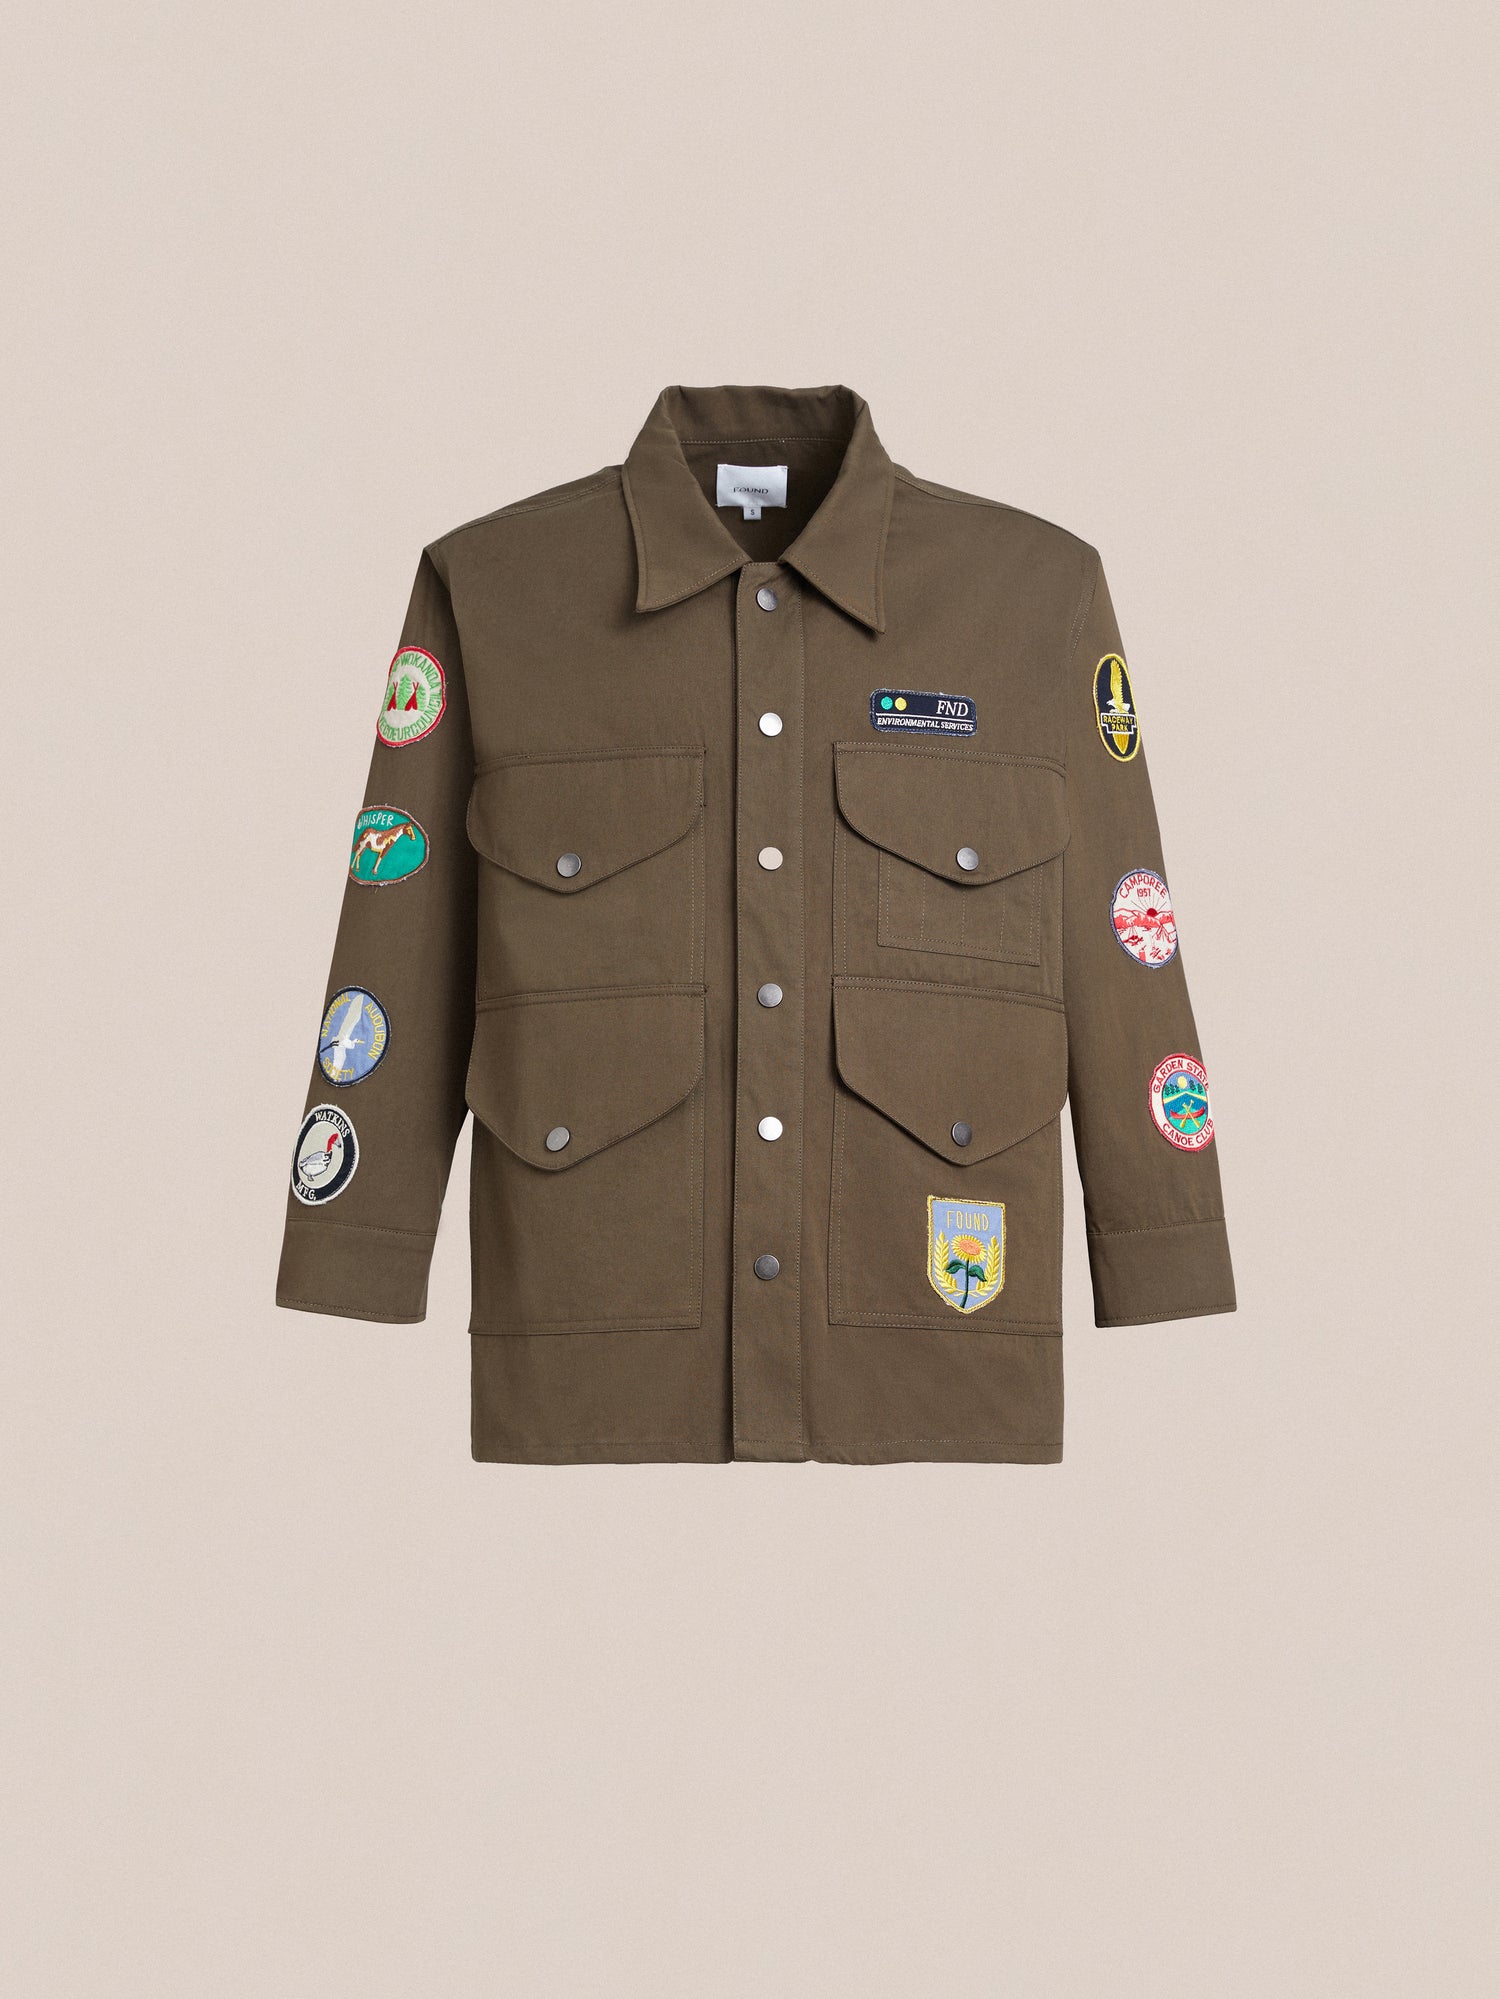 A Found Ports Park Multi Patch Work Jacket with embroidered patches on it.